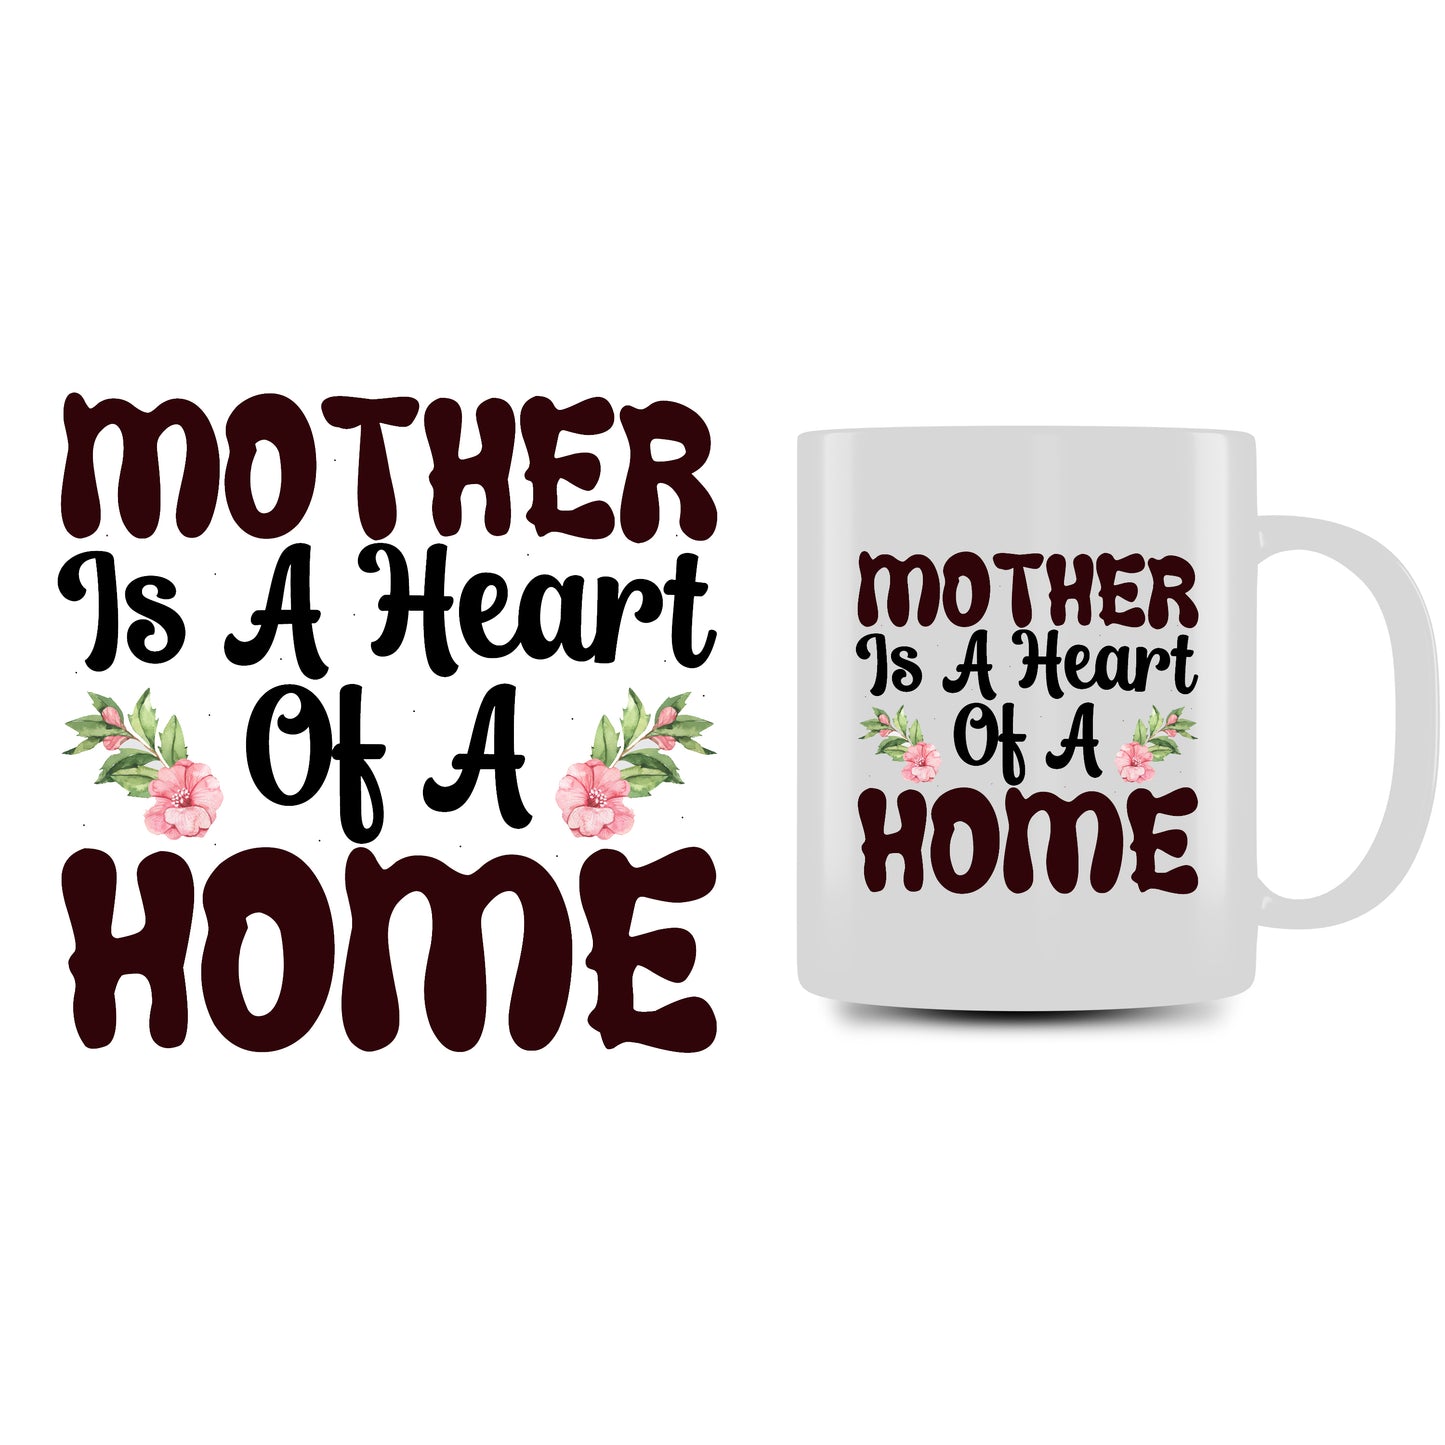 Personalized Mug For Mom (You're The Heart of a Home)